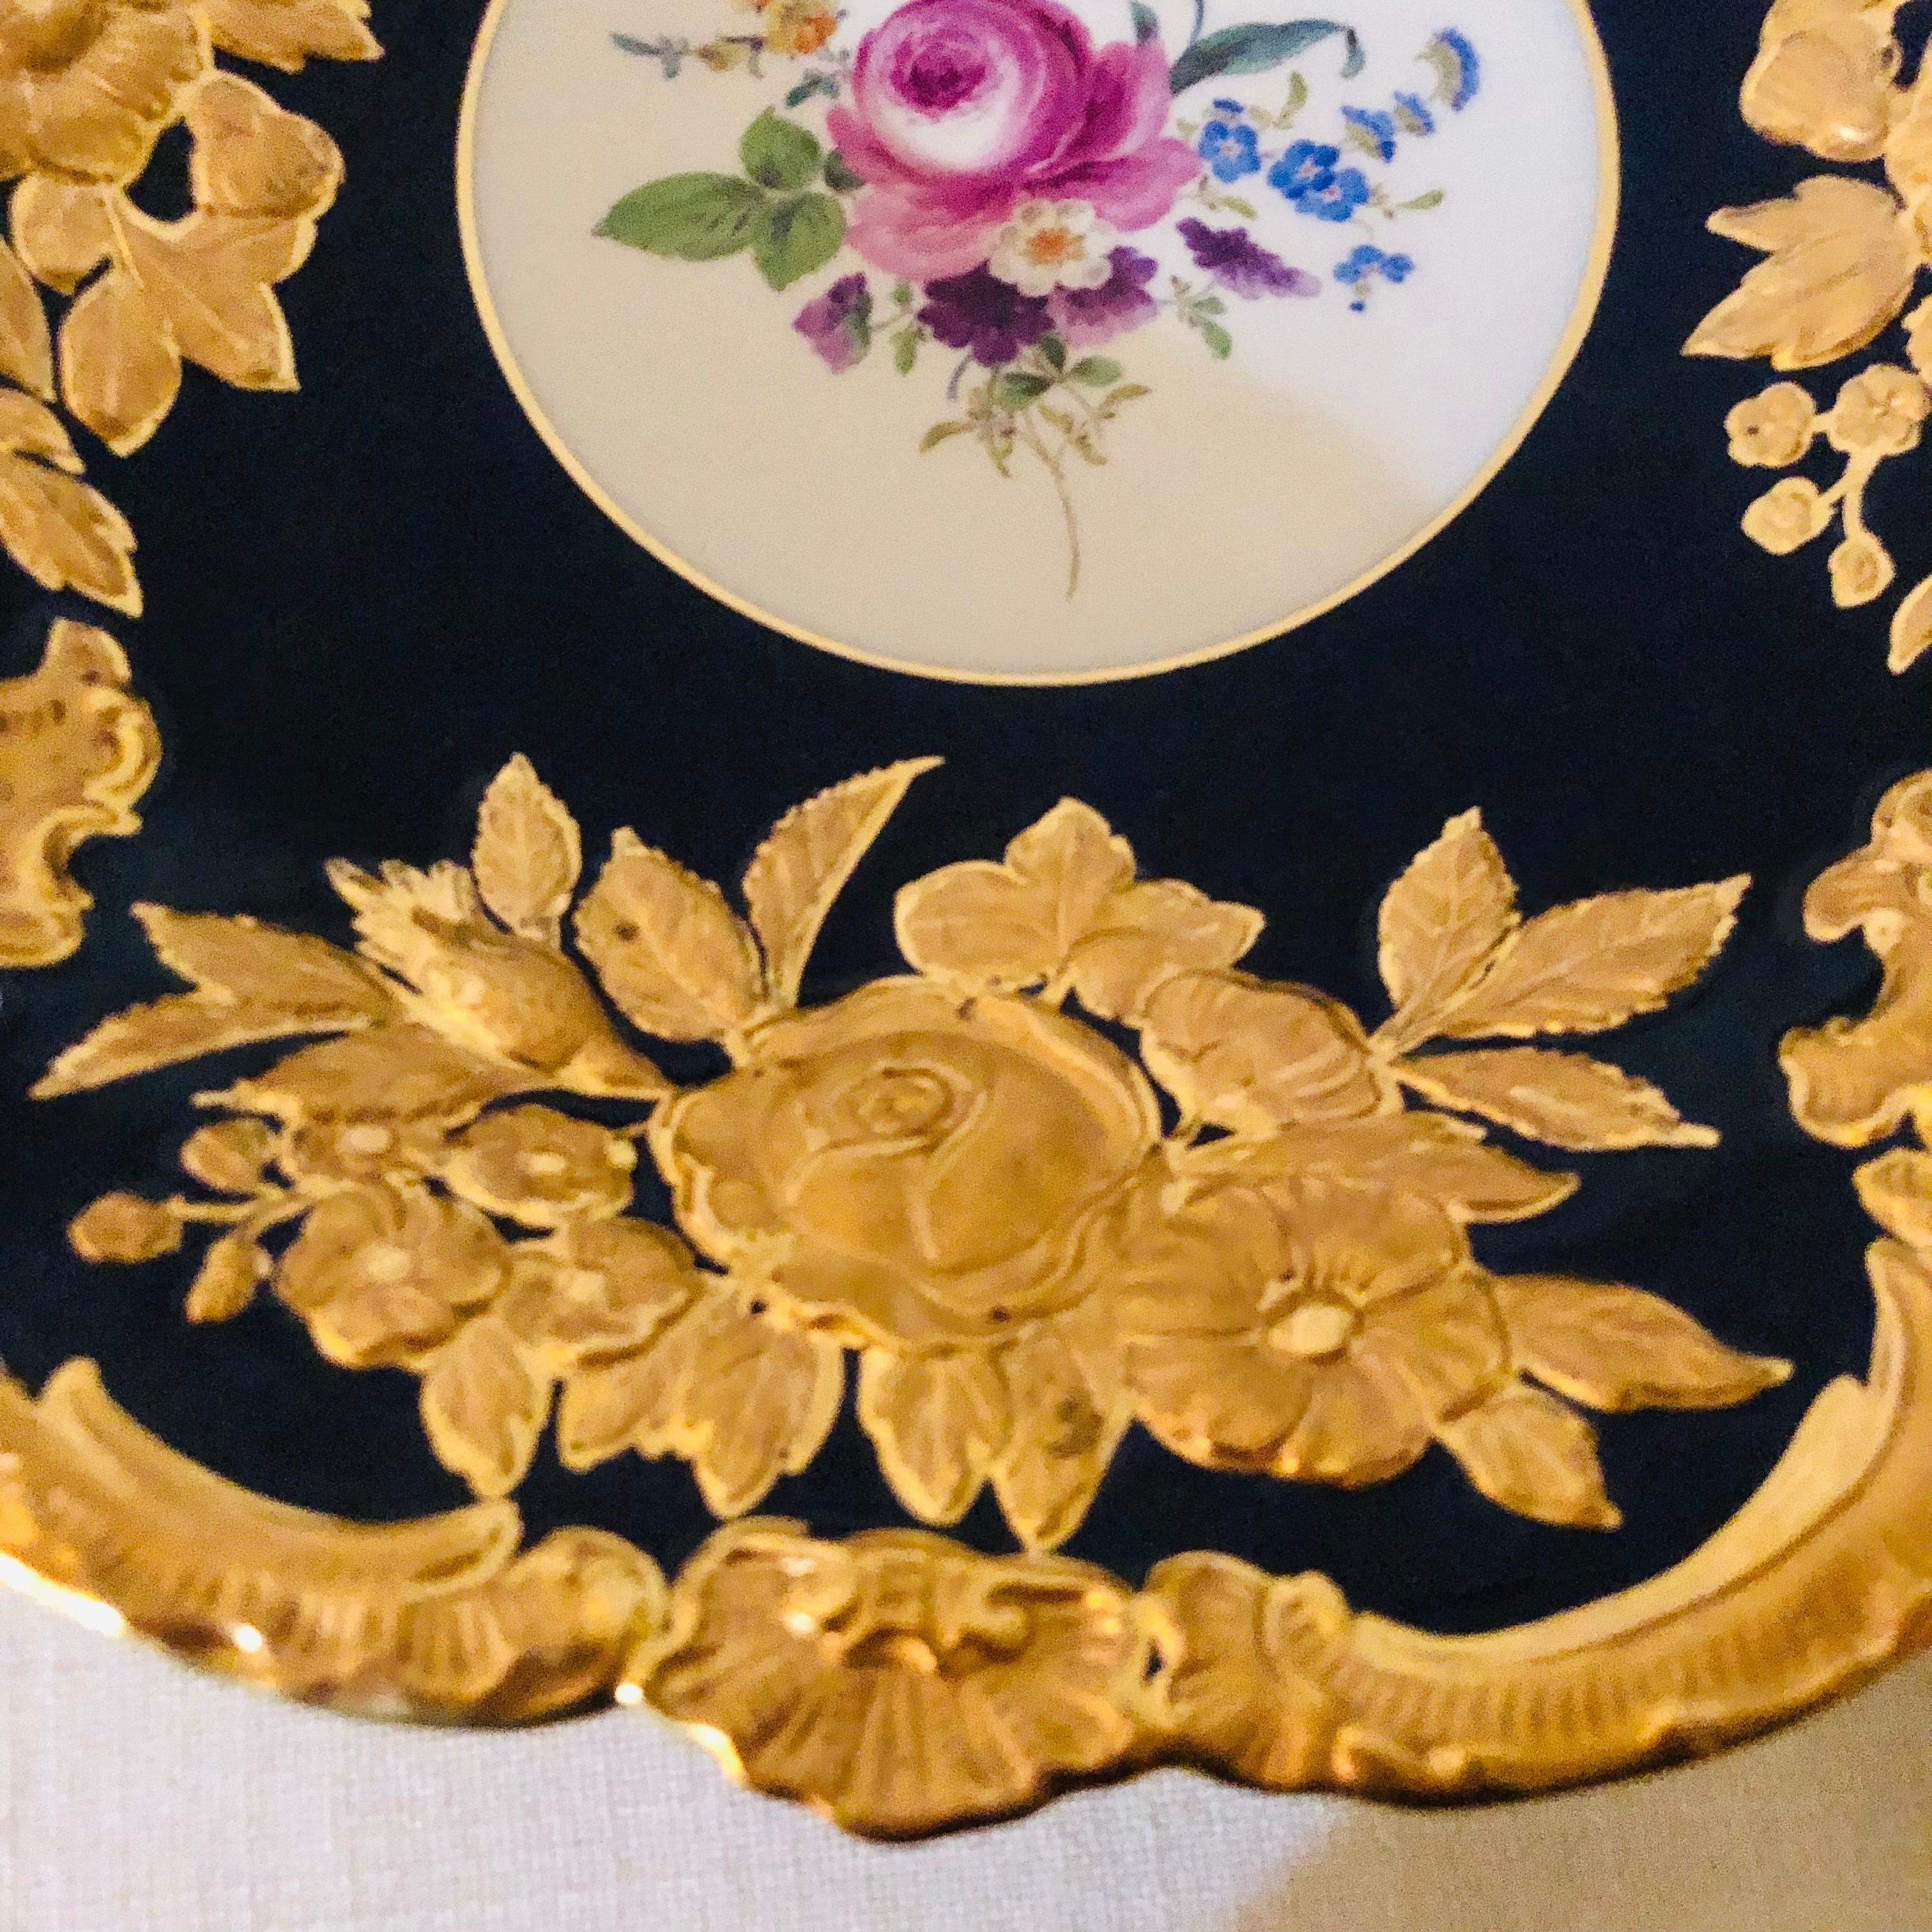 Mid-20th Century Meissen Cobalt Charger with Raised Gilded Flowers, Leaves & Gilt Fluted Border